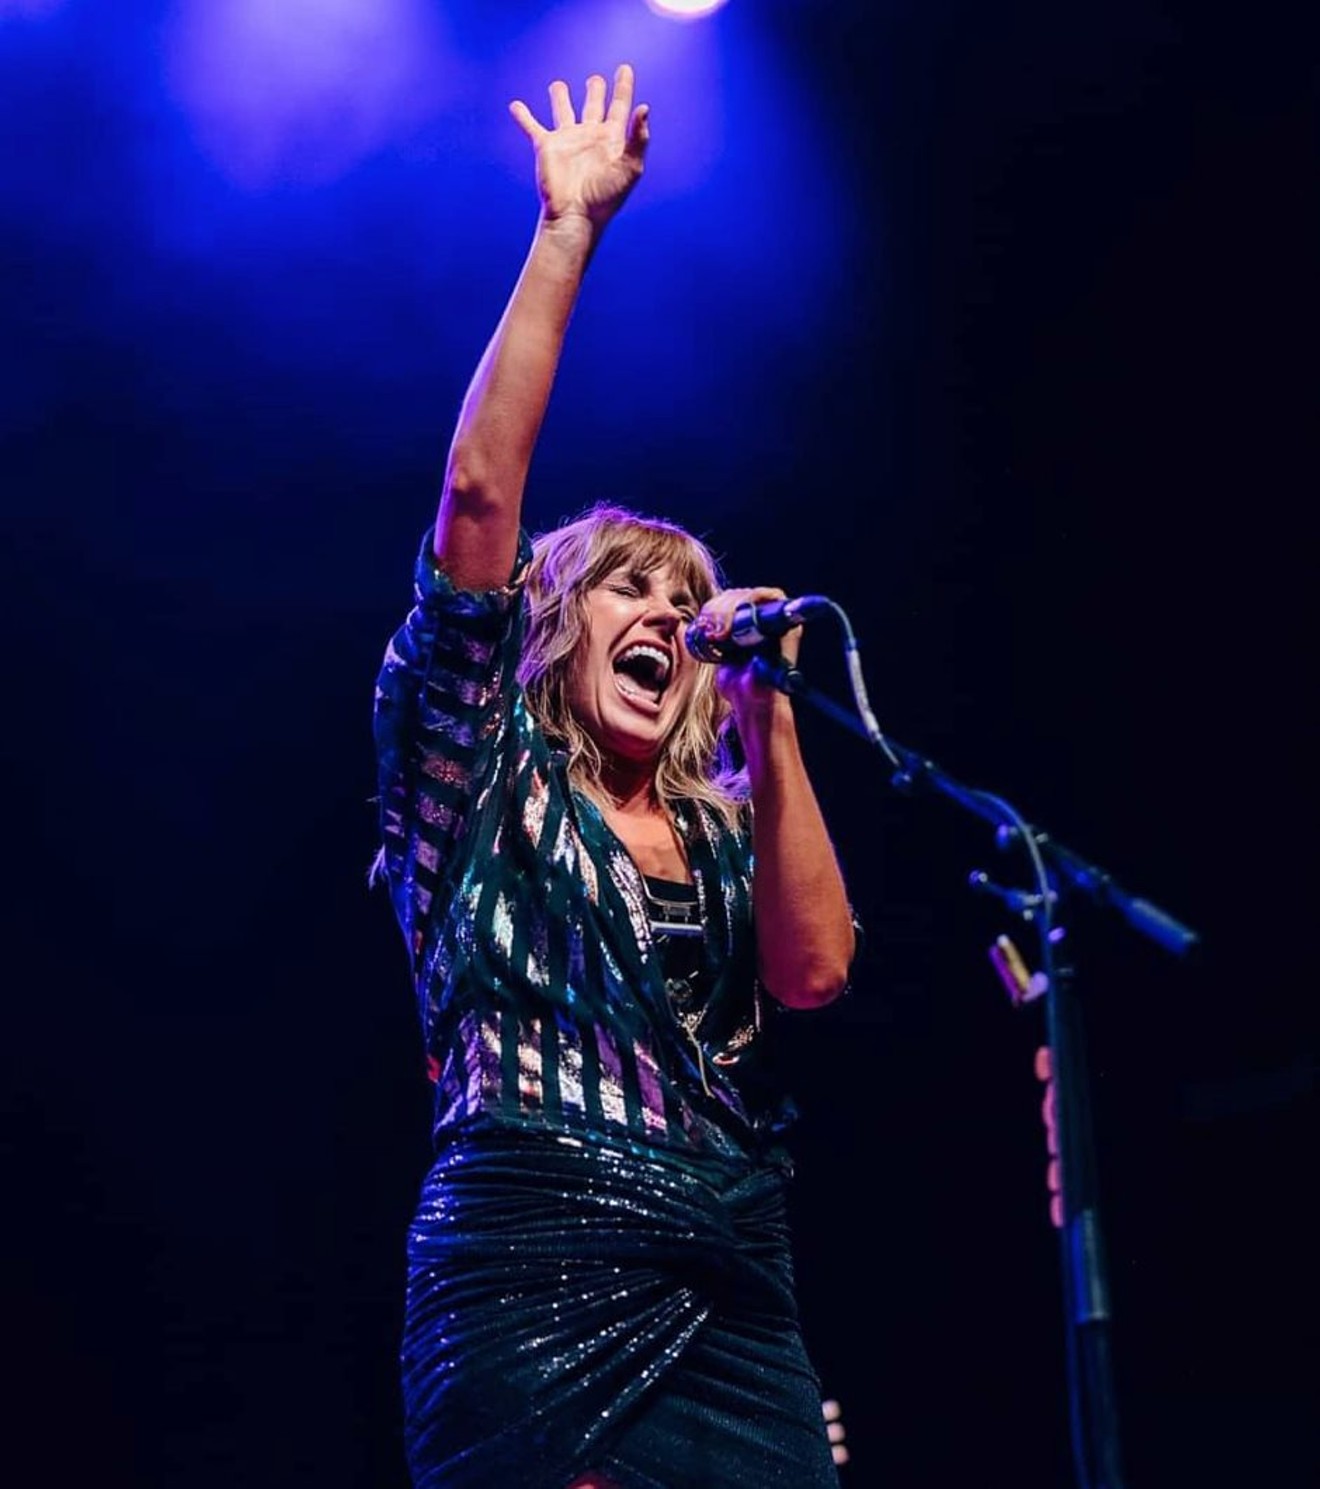 The Grammy-nominated rock, blues and soul singer, who co-founded the rock band Grace Potter & the Nocturnals, still throws one or two Nocturnals staples into her solo sets, including the 2007 smash “Apologies.”